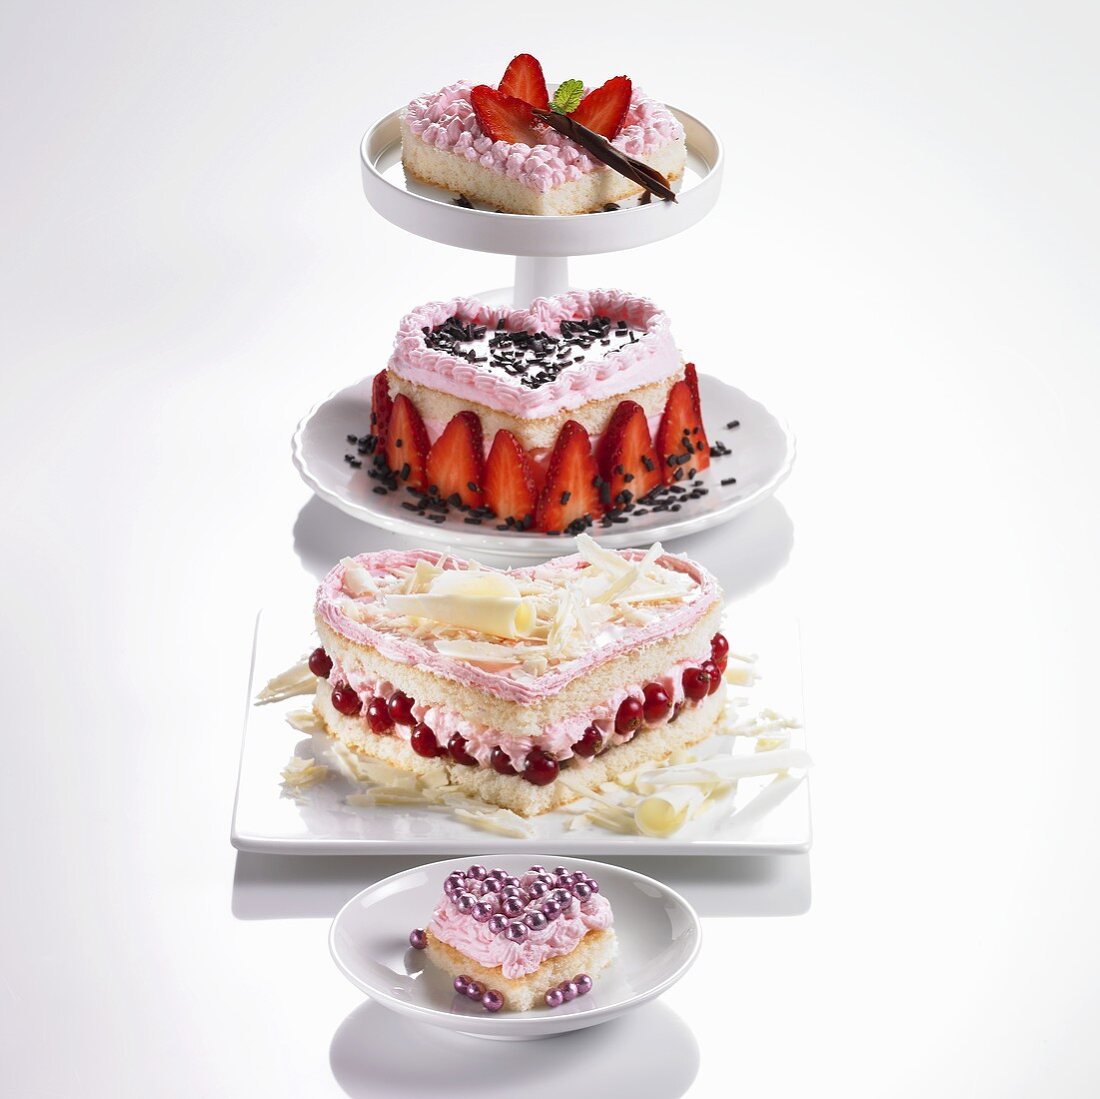 Four heart-shaped sponge cakes with redcurrants or strawberries & cream